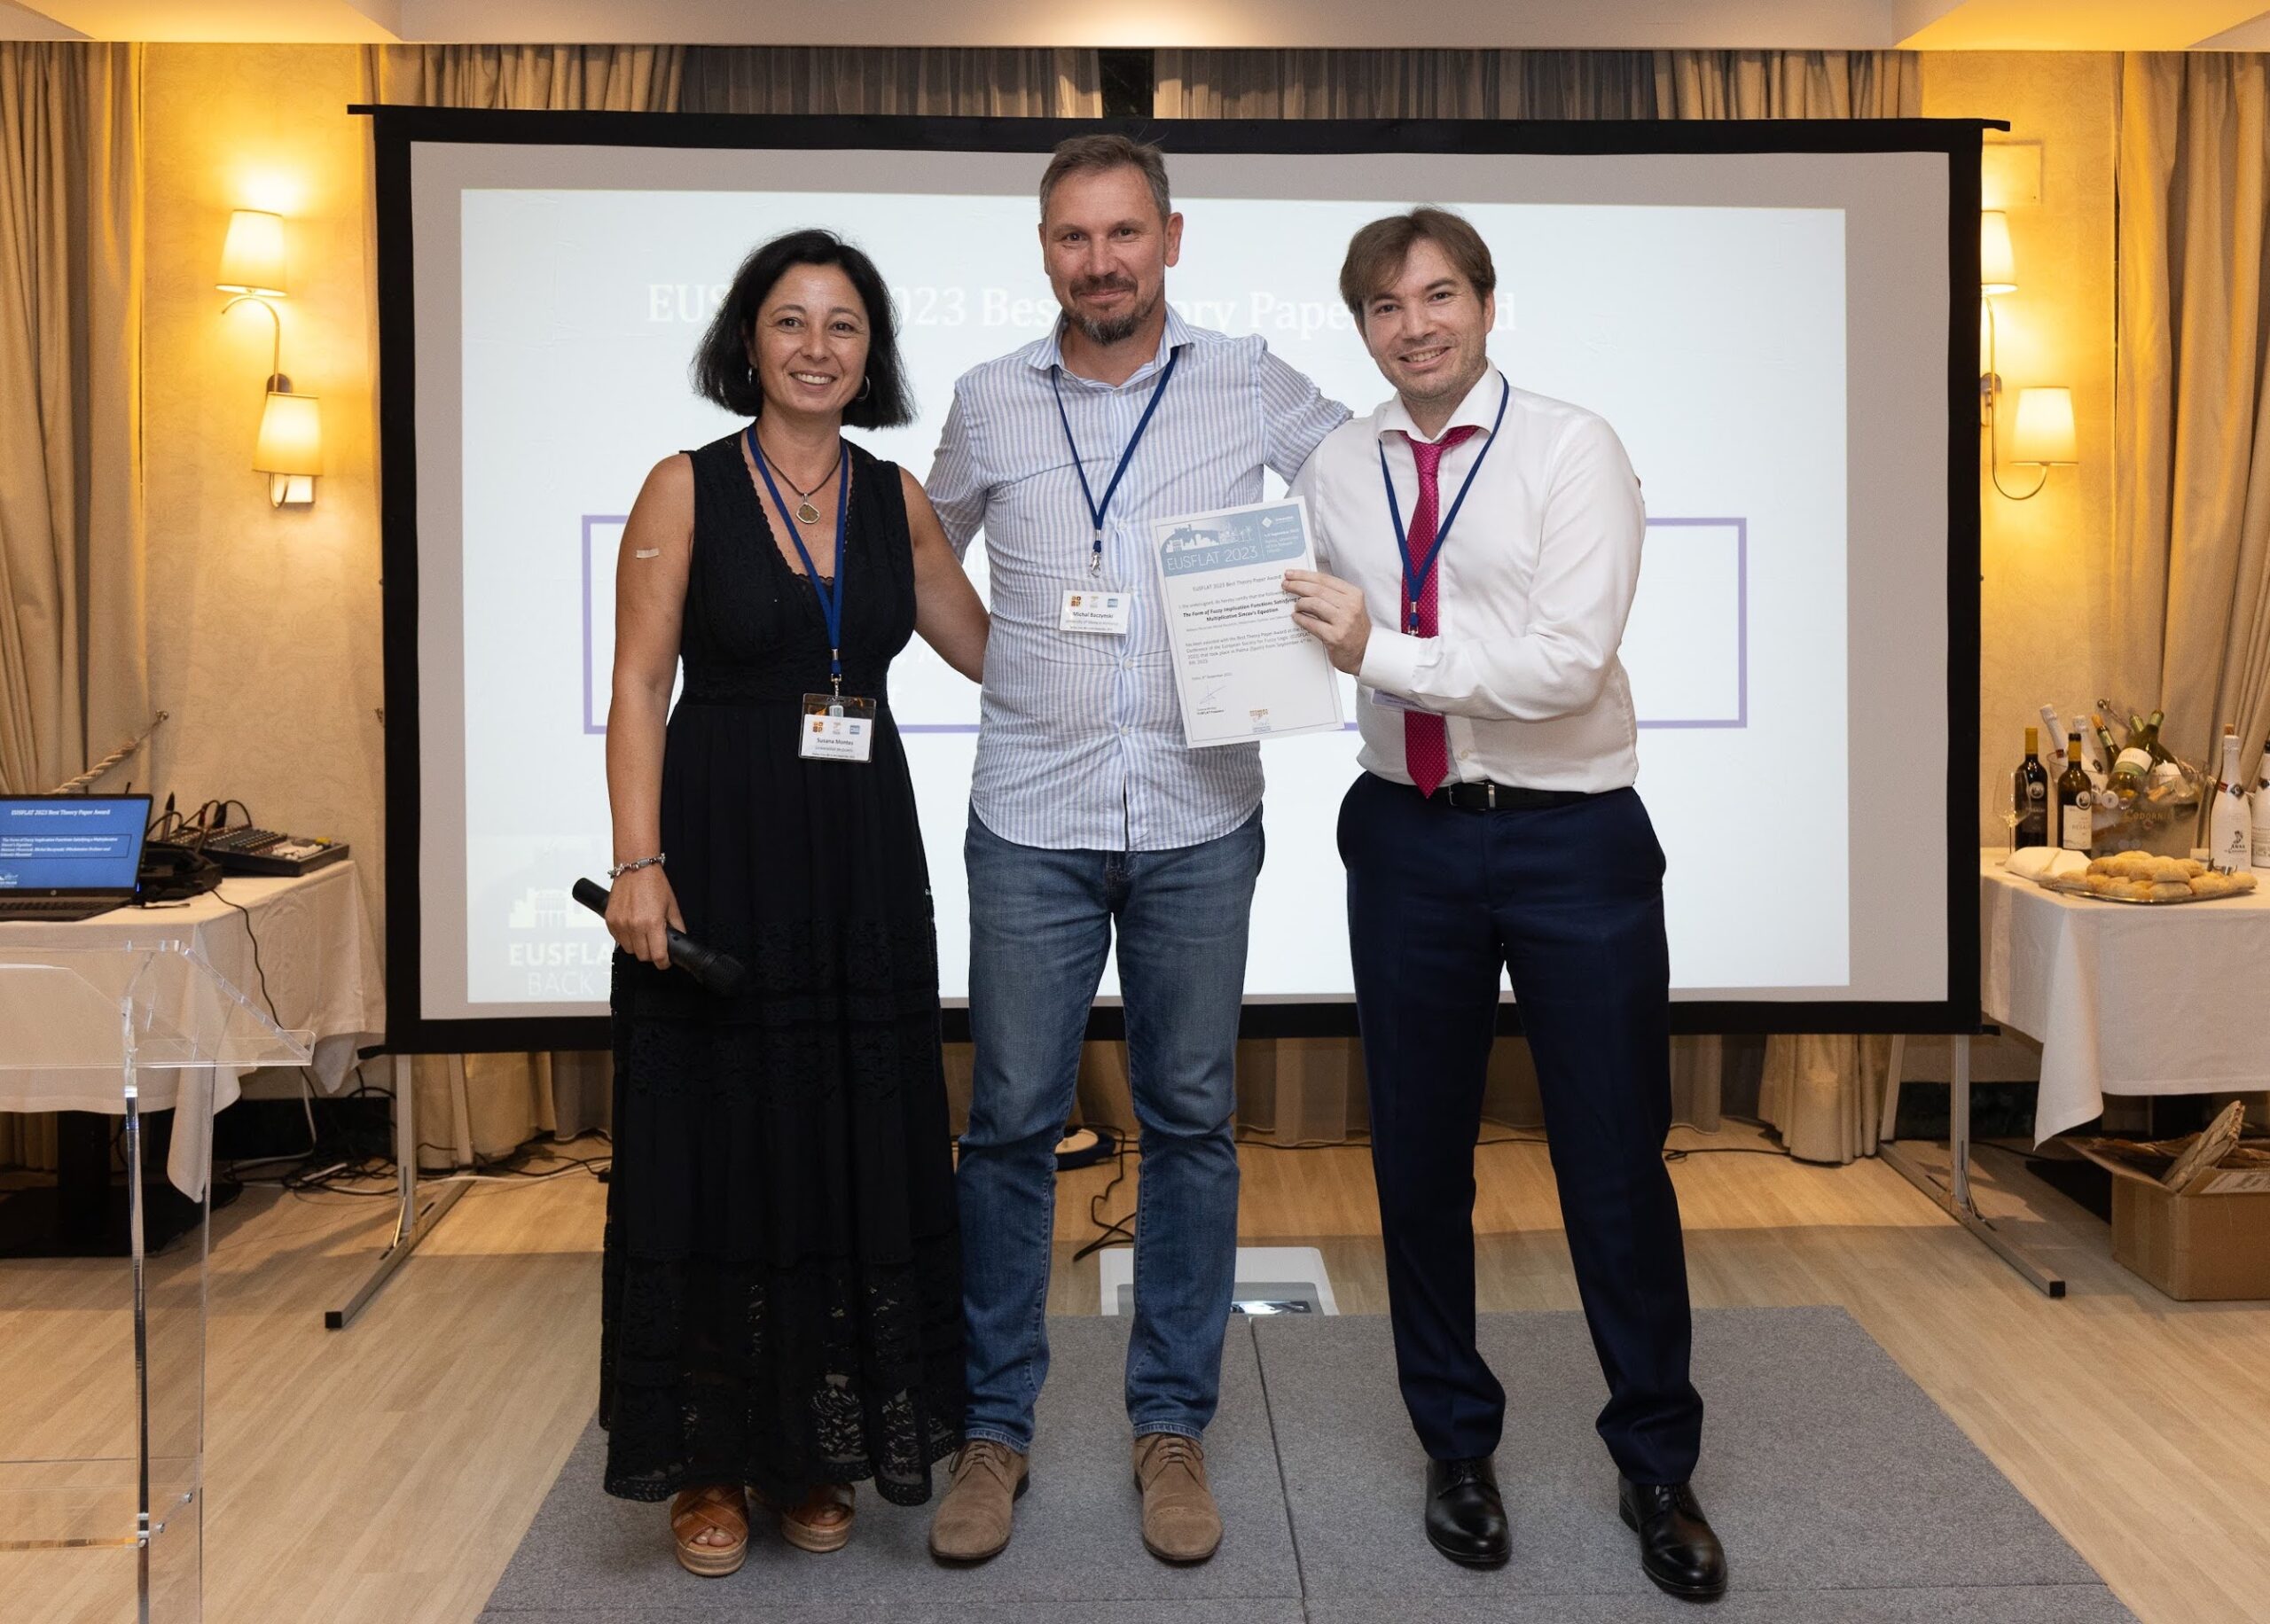 13th Conference of the European Society for Fuzzy Logic and Technology jointly with the AGOP and FQAS conferences, Palma, Spain, September 4-8, 2023